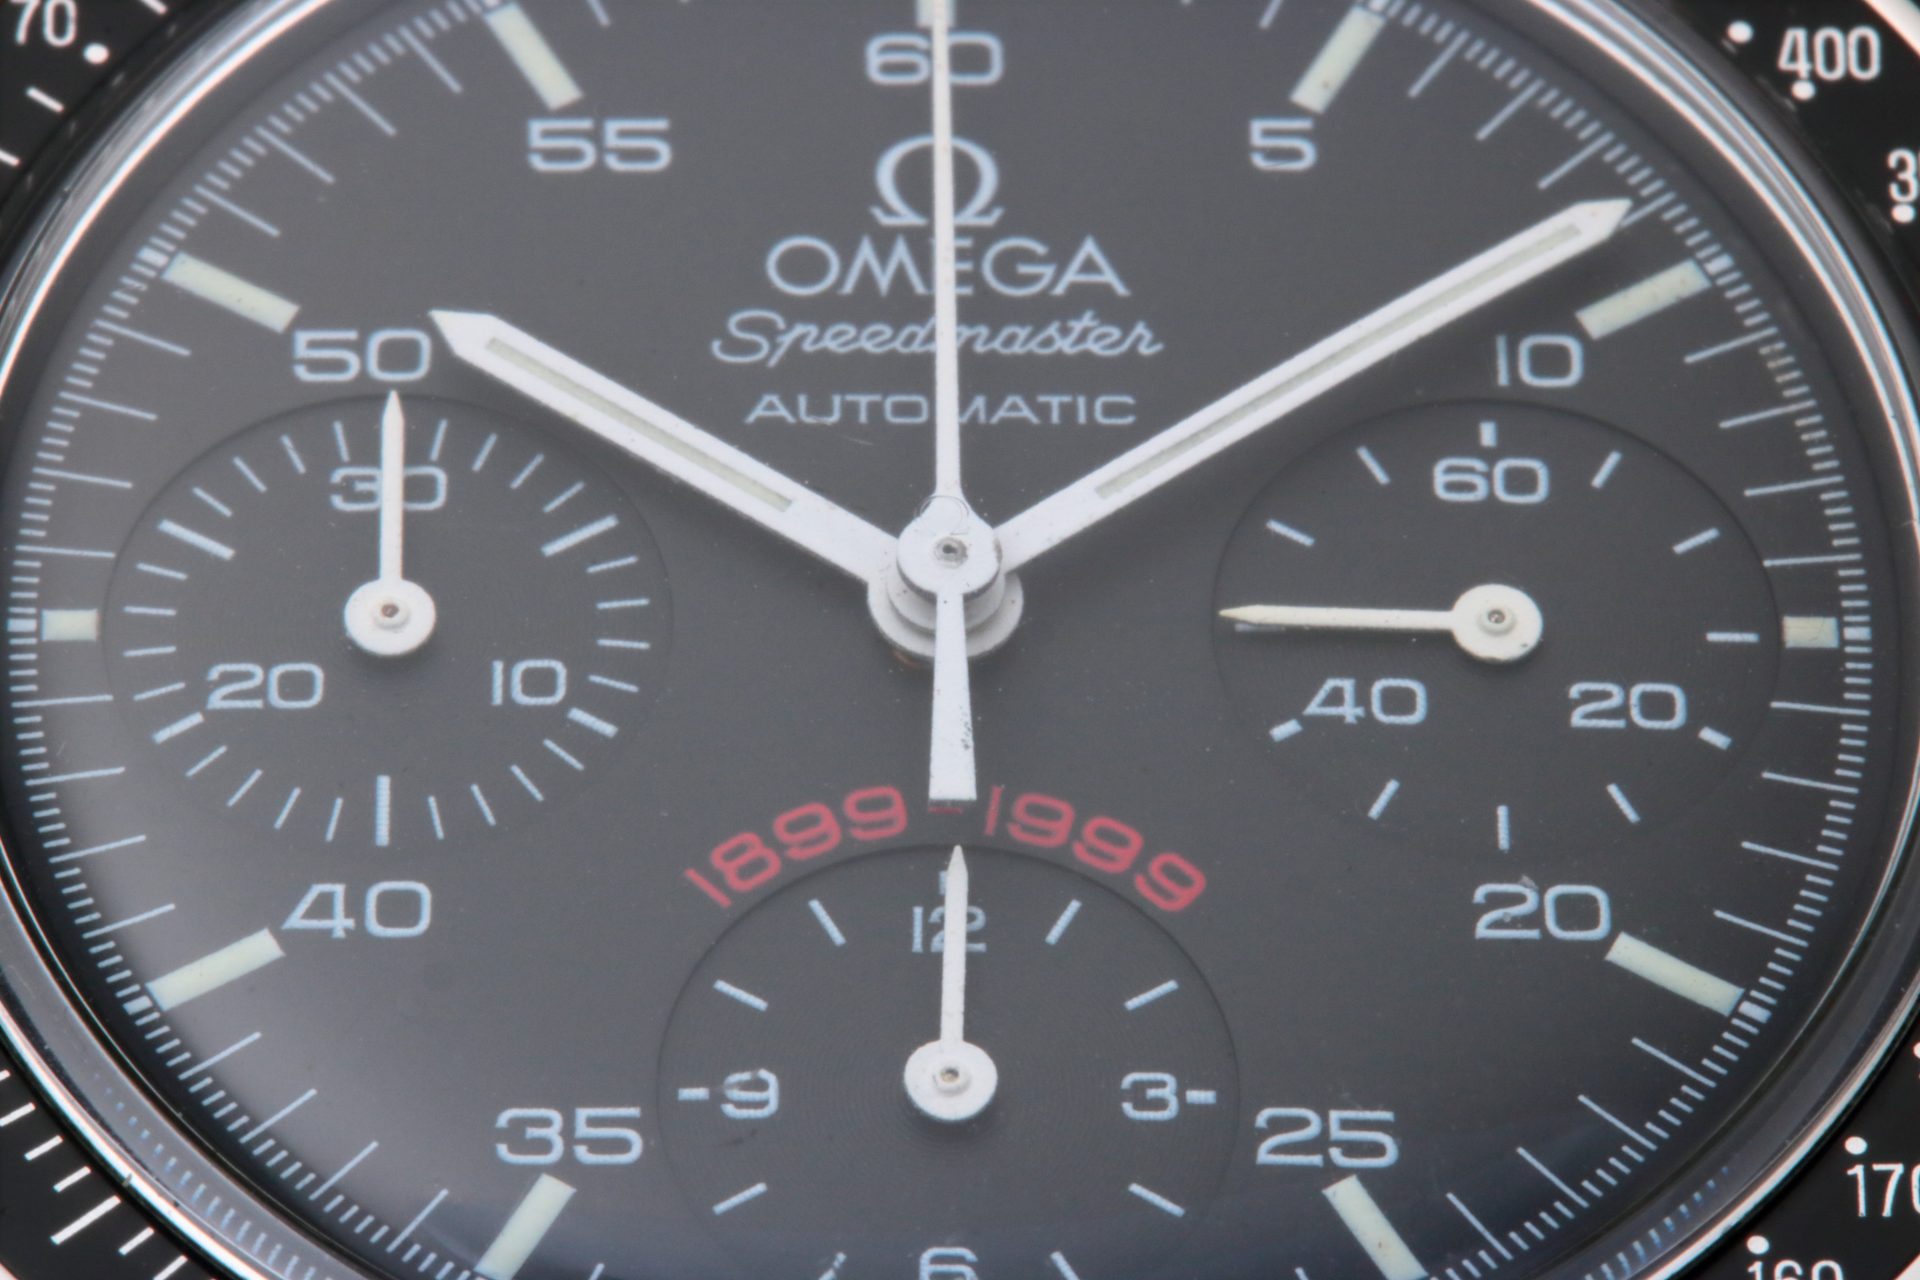 Omega Speedmaster A.C. Milan 1899 - 1999 dial close up of the 3810.51.41. Note the original Omega Hesalite crystal indicated by the Omega logo in the center of the crystal.